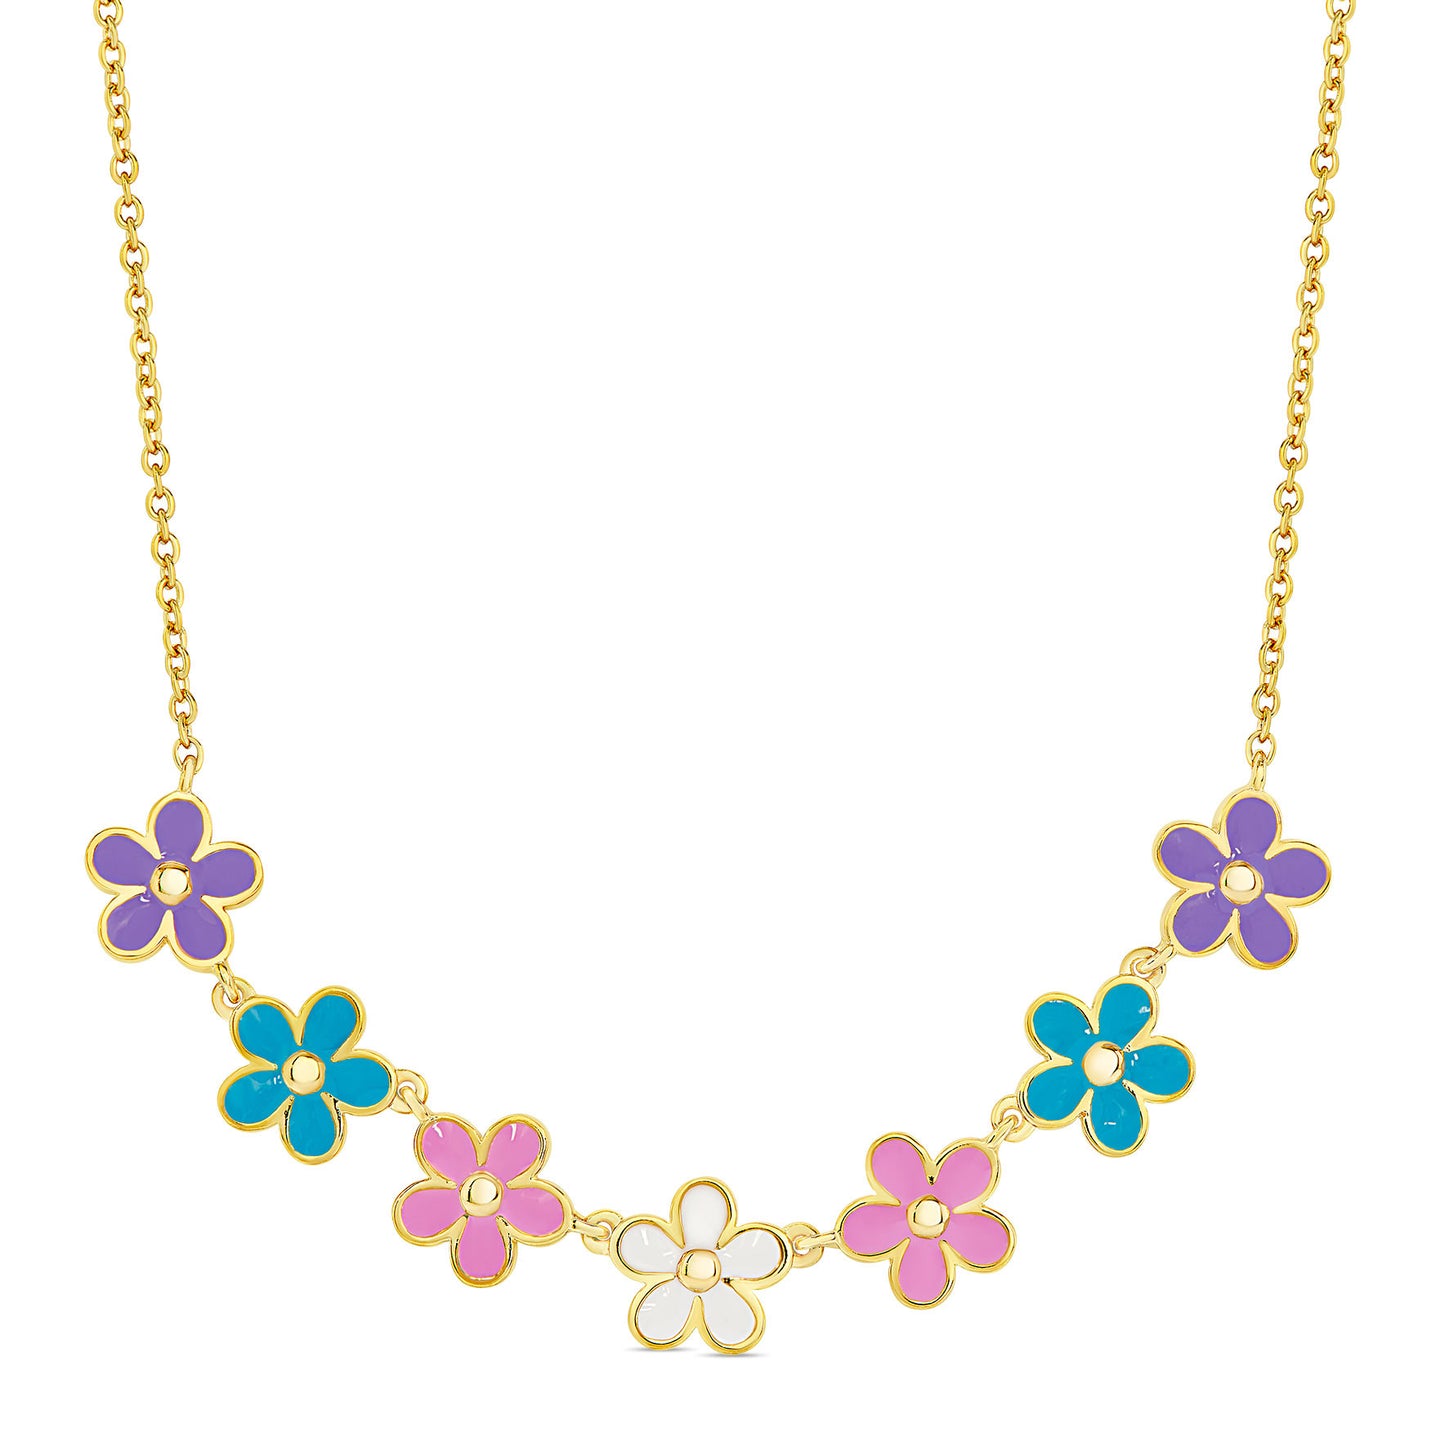 Lily Nily Flower Frontal Necklace